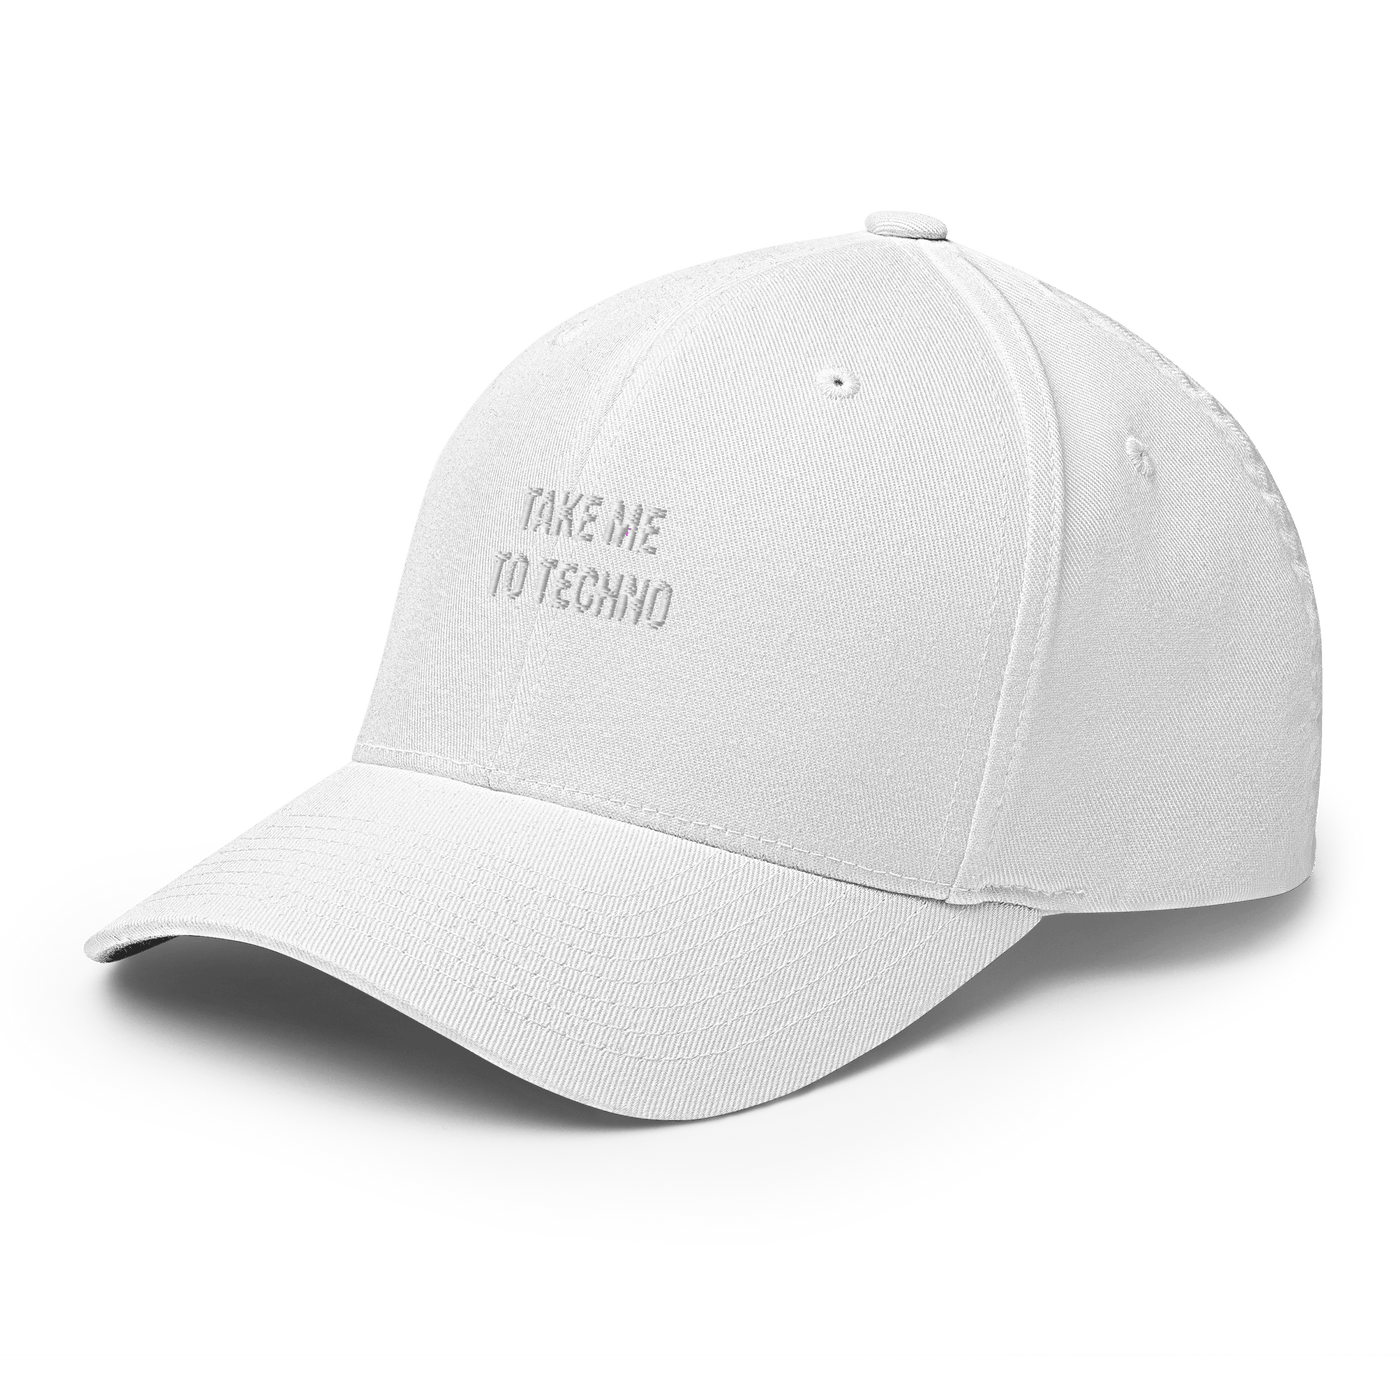 Take me to techno Flexfit Cap - White - S/M - Just Another Cap Store